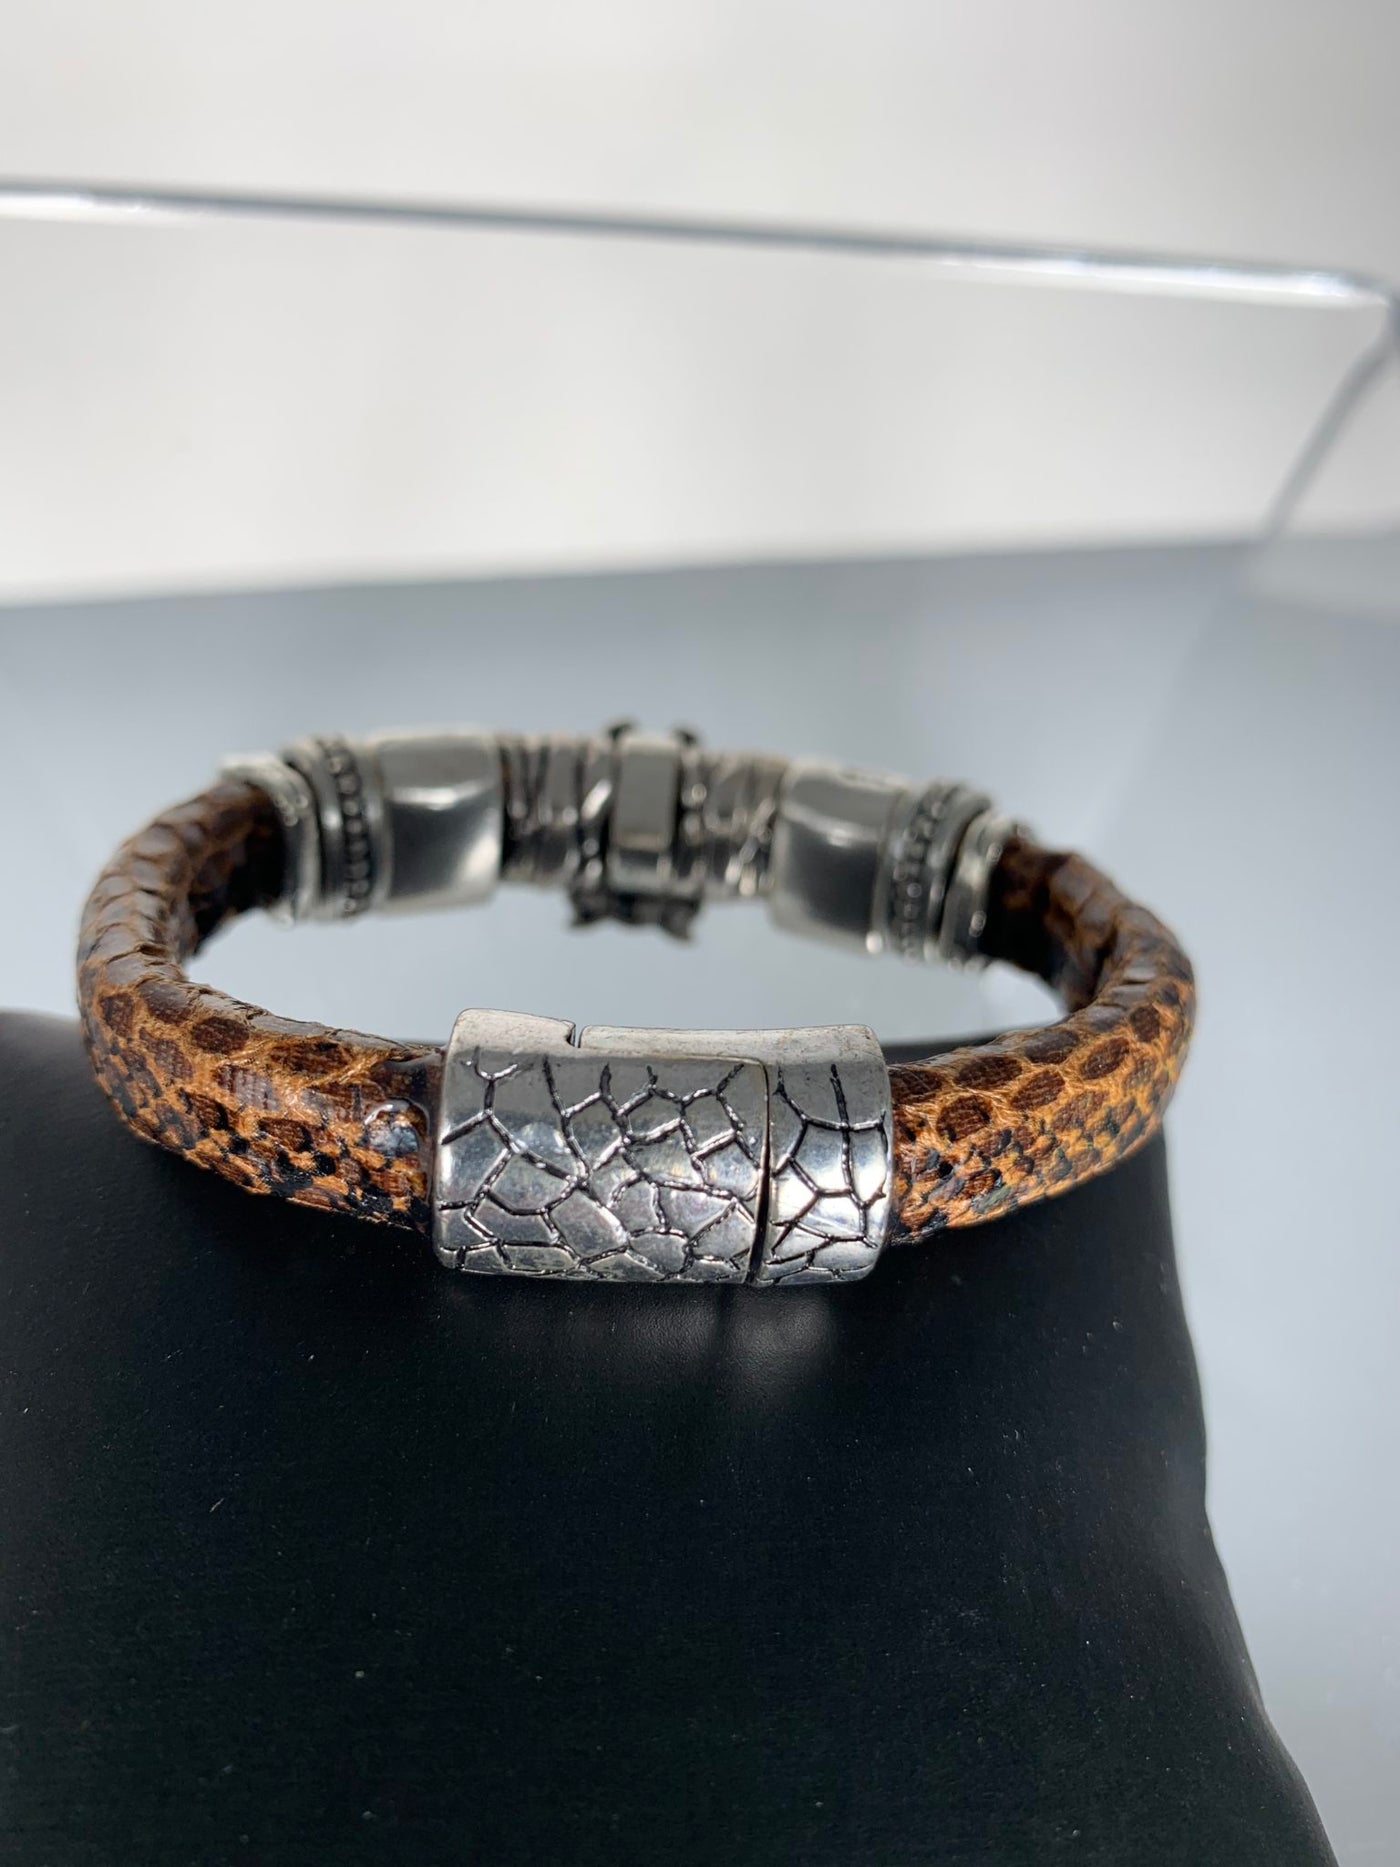 Brown Faux Snake Skin Band Bracelet Featuring a Wise Owl